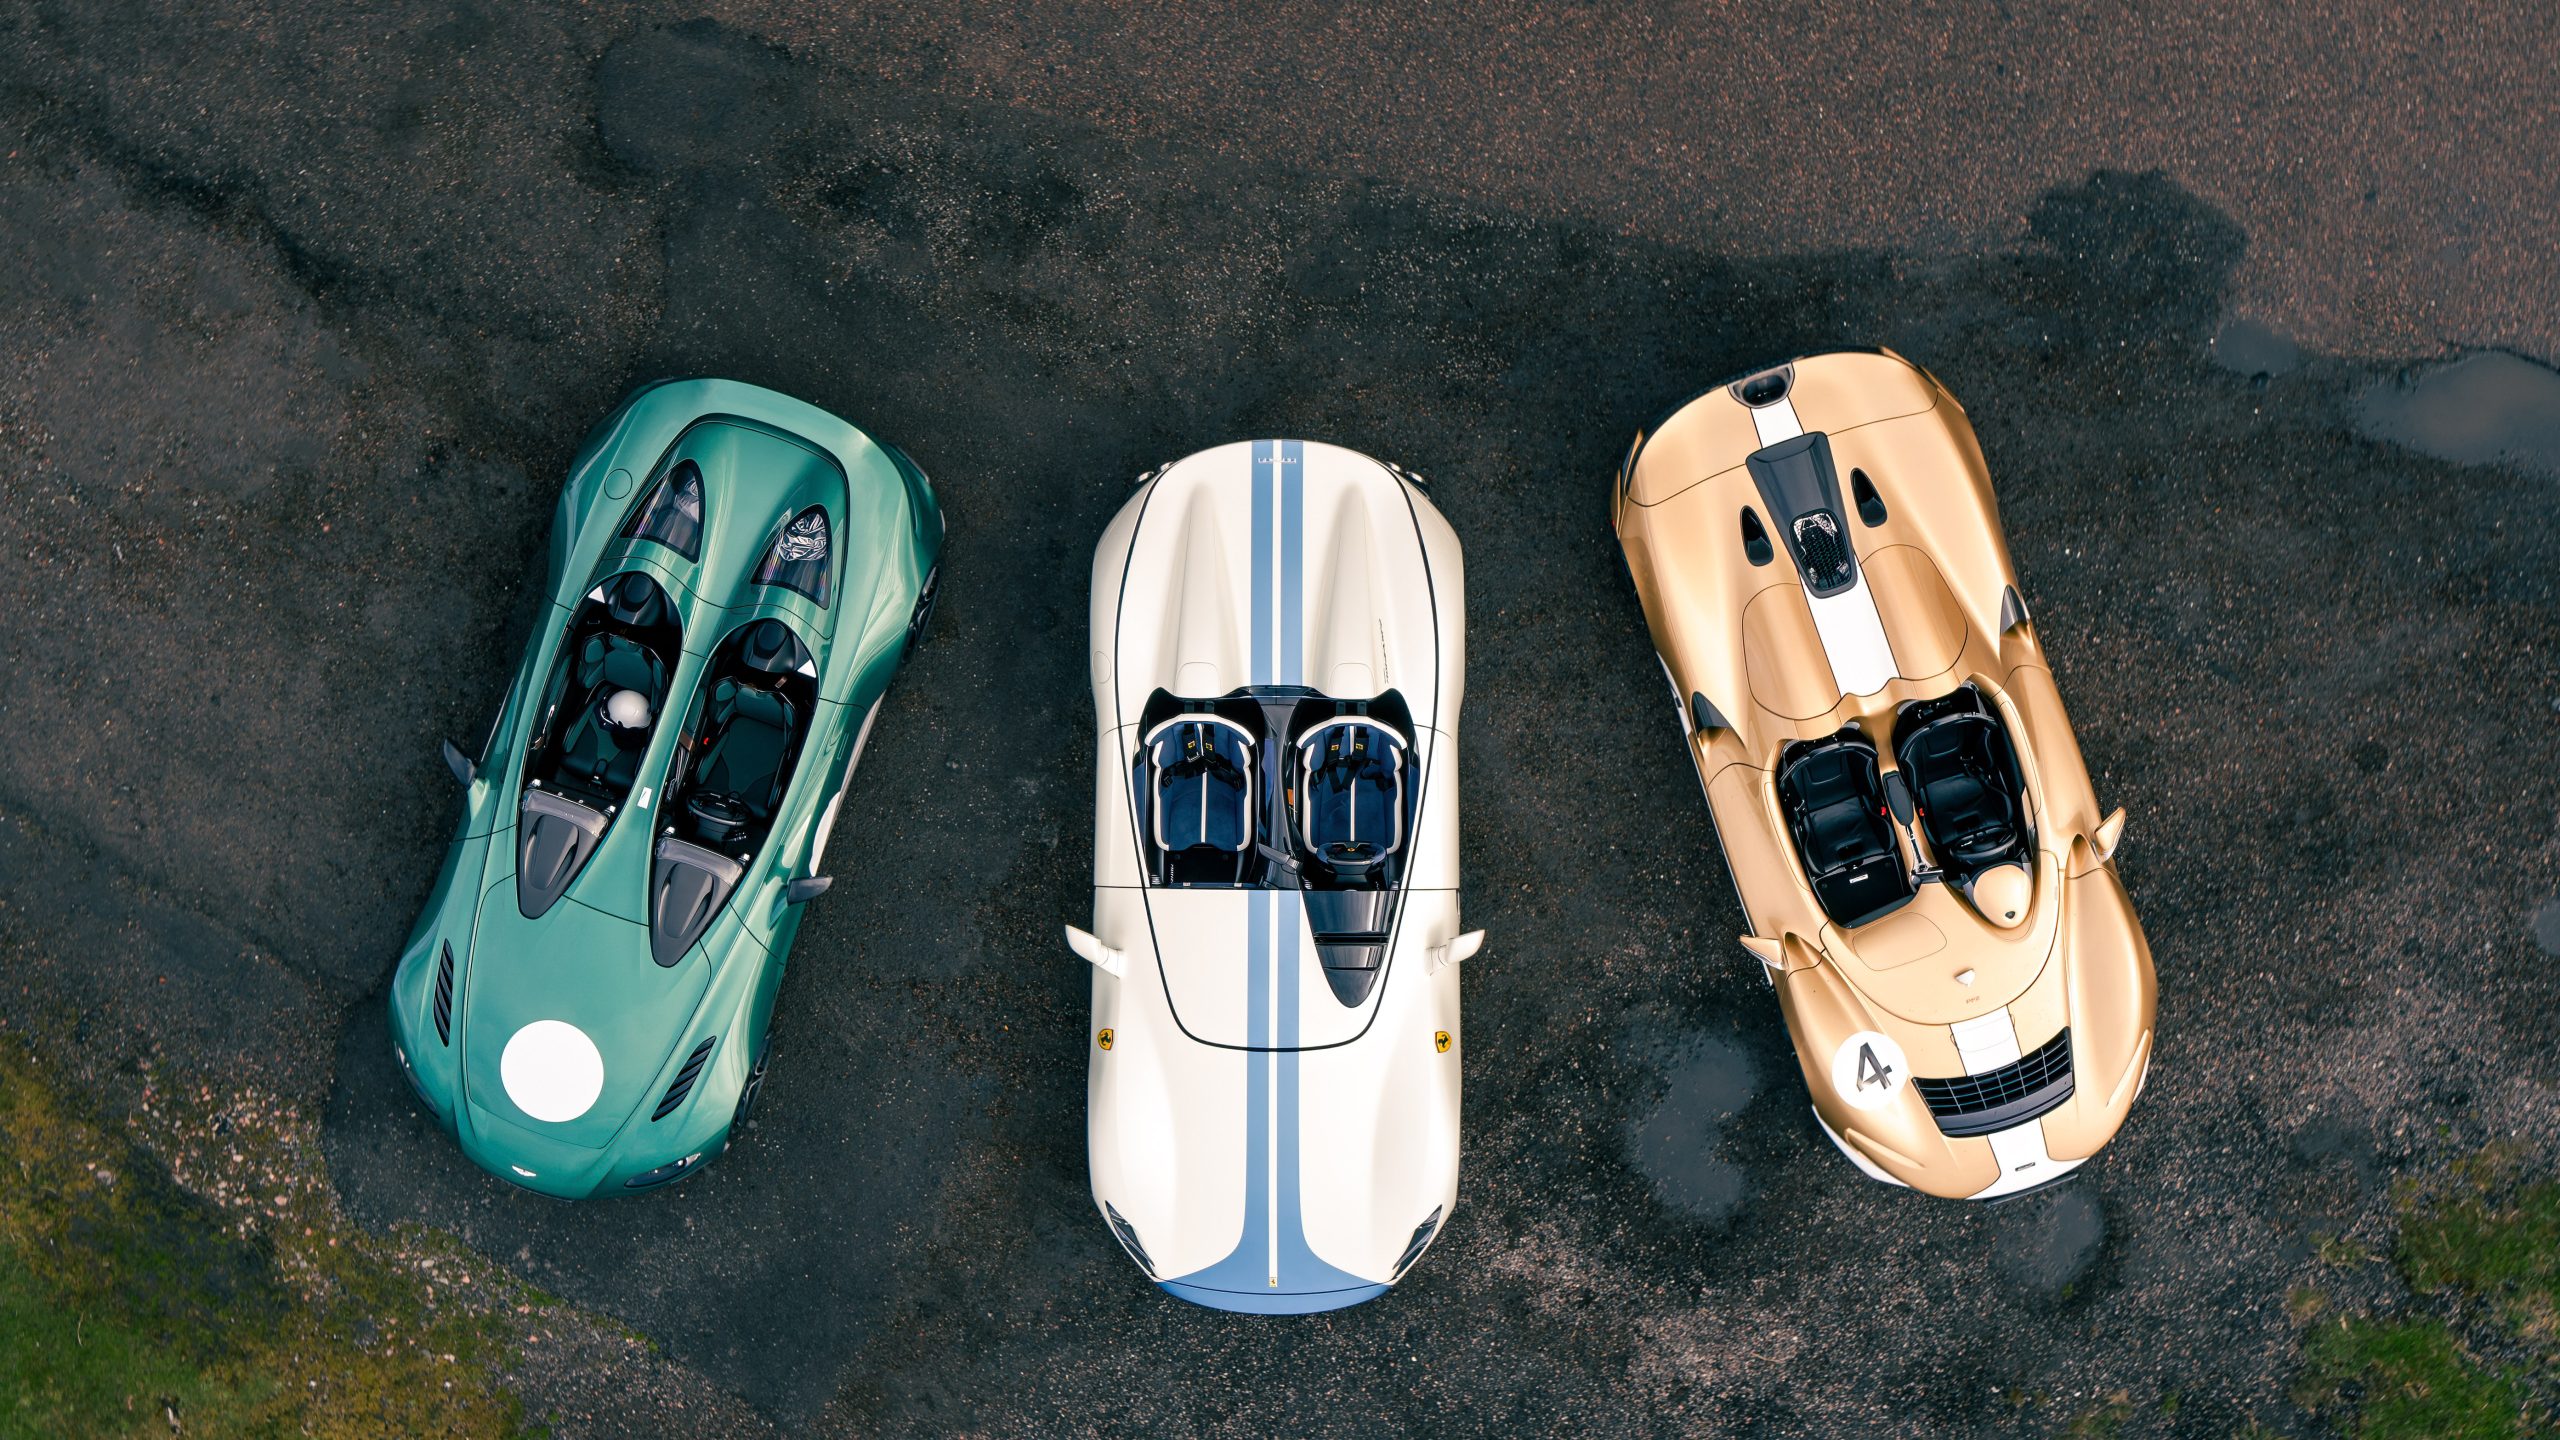 Aerial image showing a green Aston Martin V12 Speedster, white and blue Ferrari Monza SP2 and gold and white McLaren Elva.